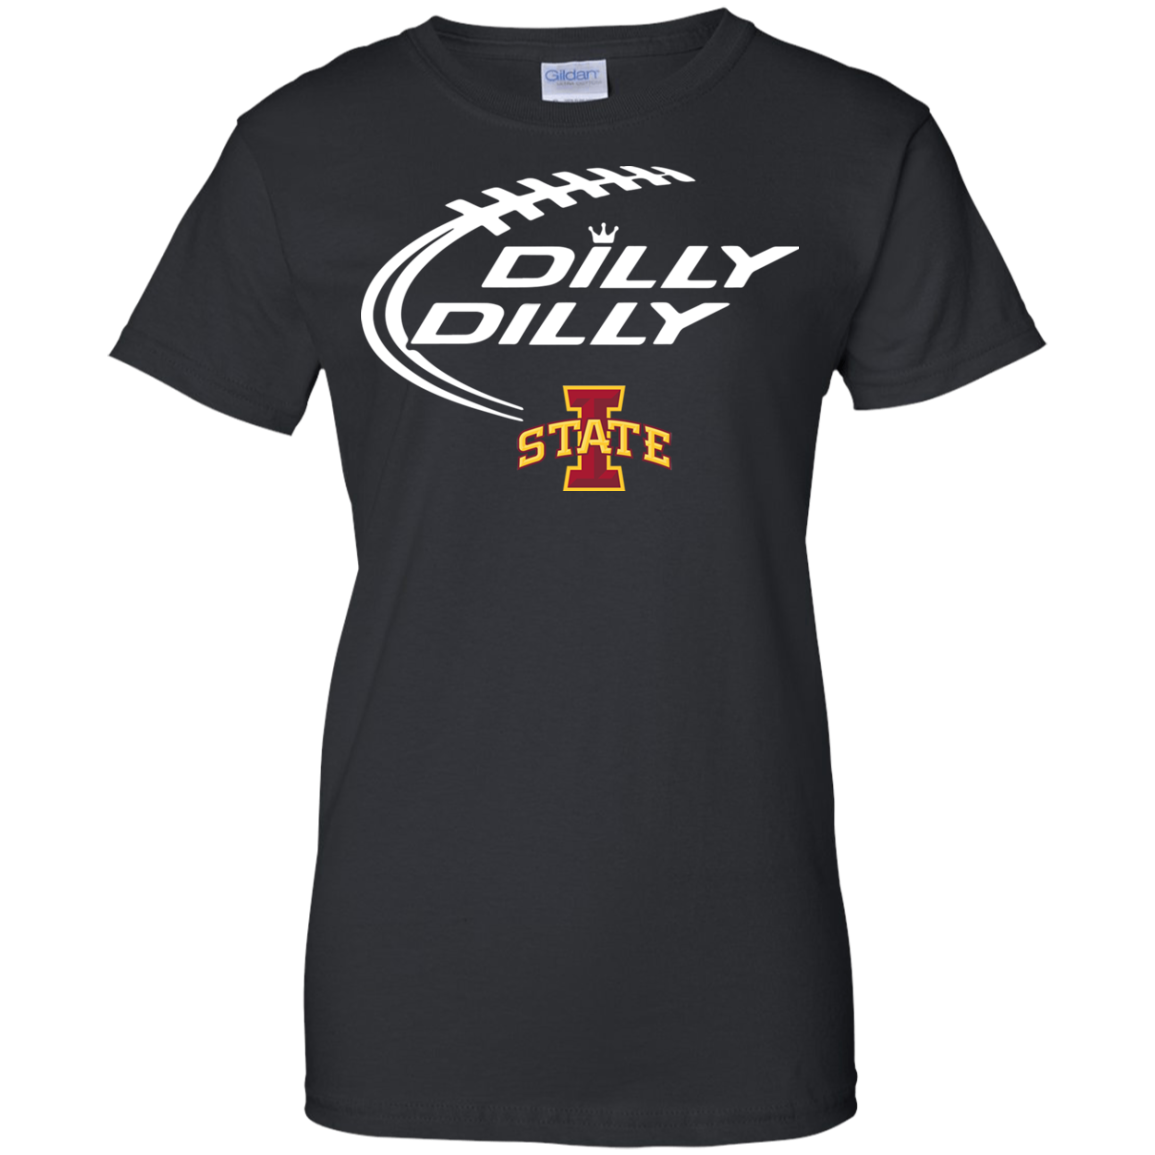 Shop From 1000 Unique Iowa State Dilly Dilly Shirt - Tula Store